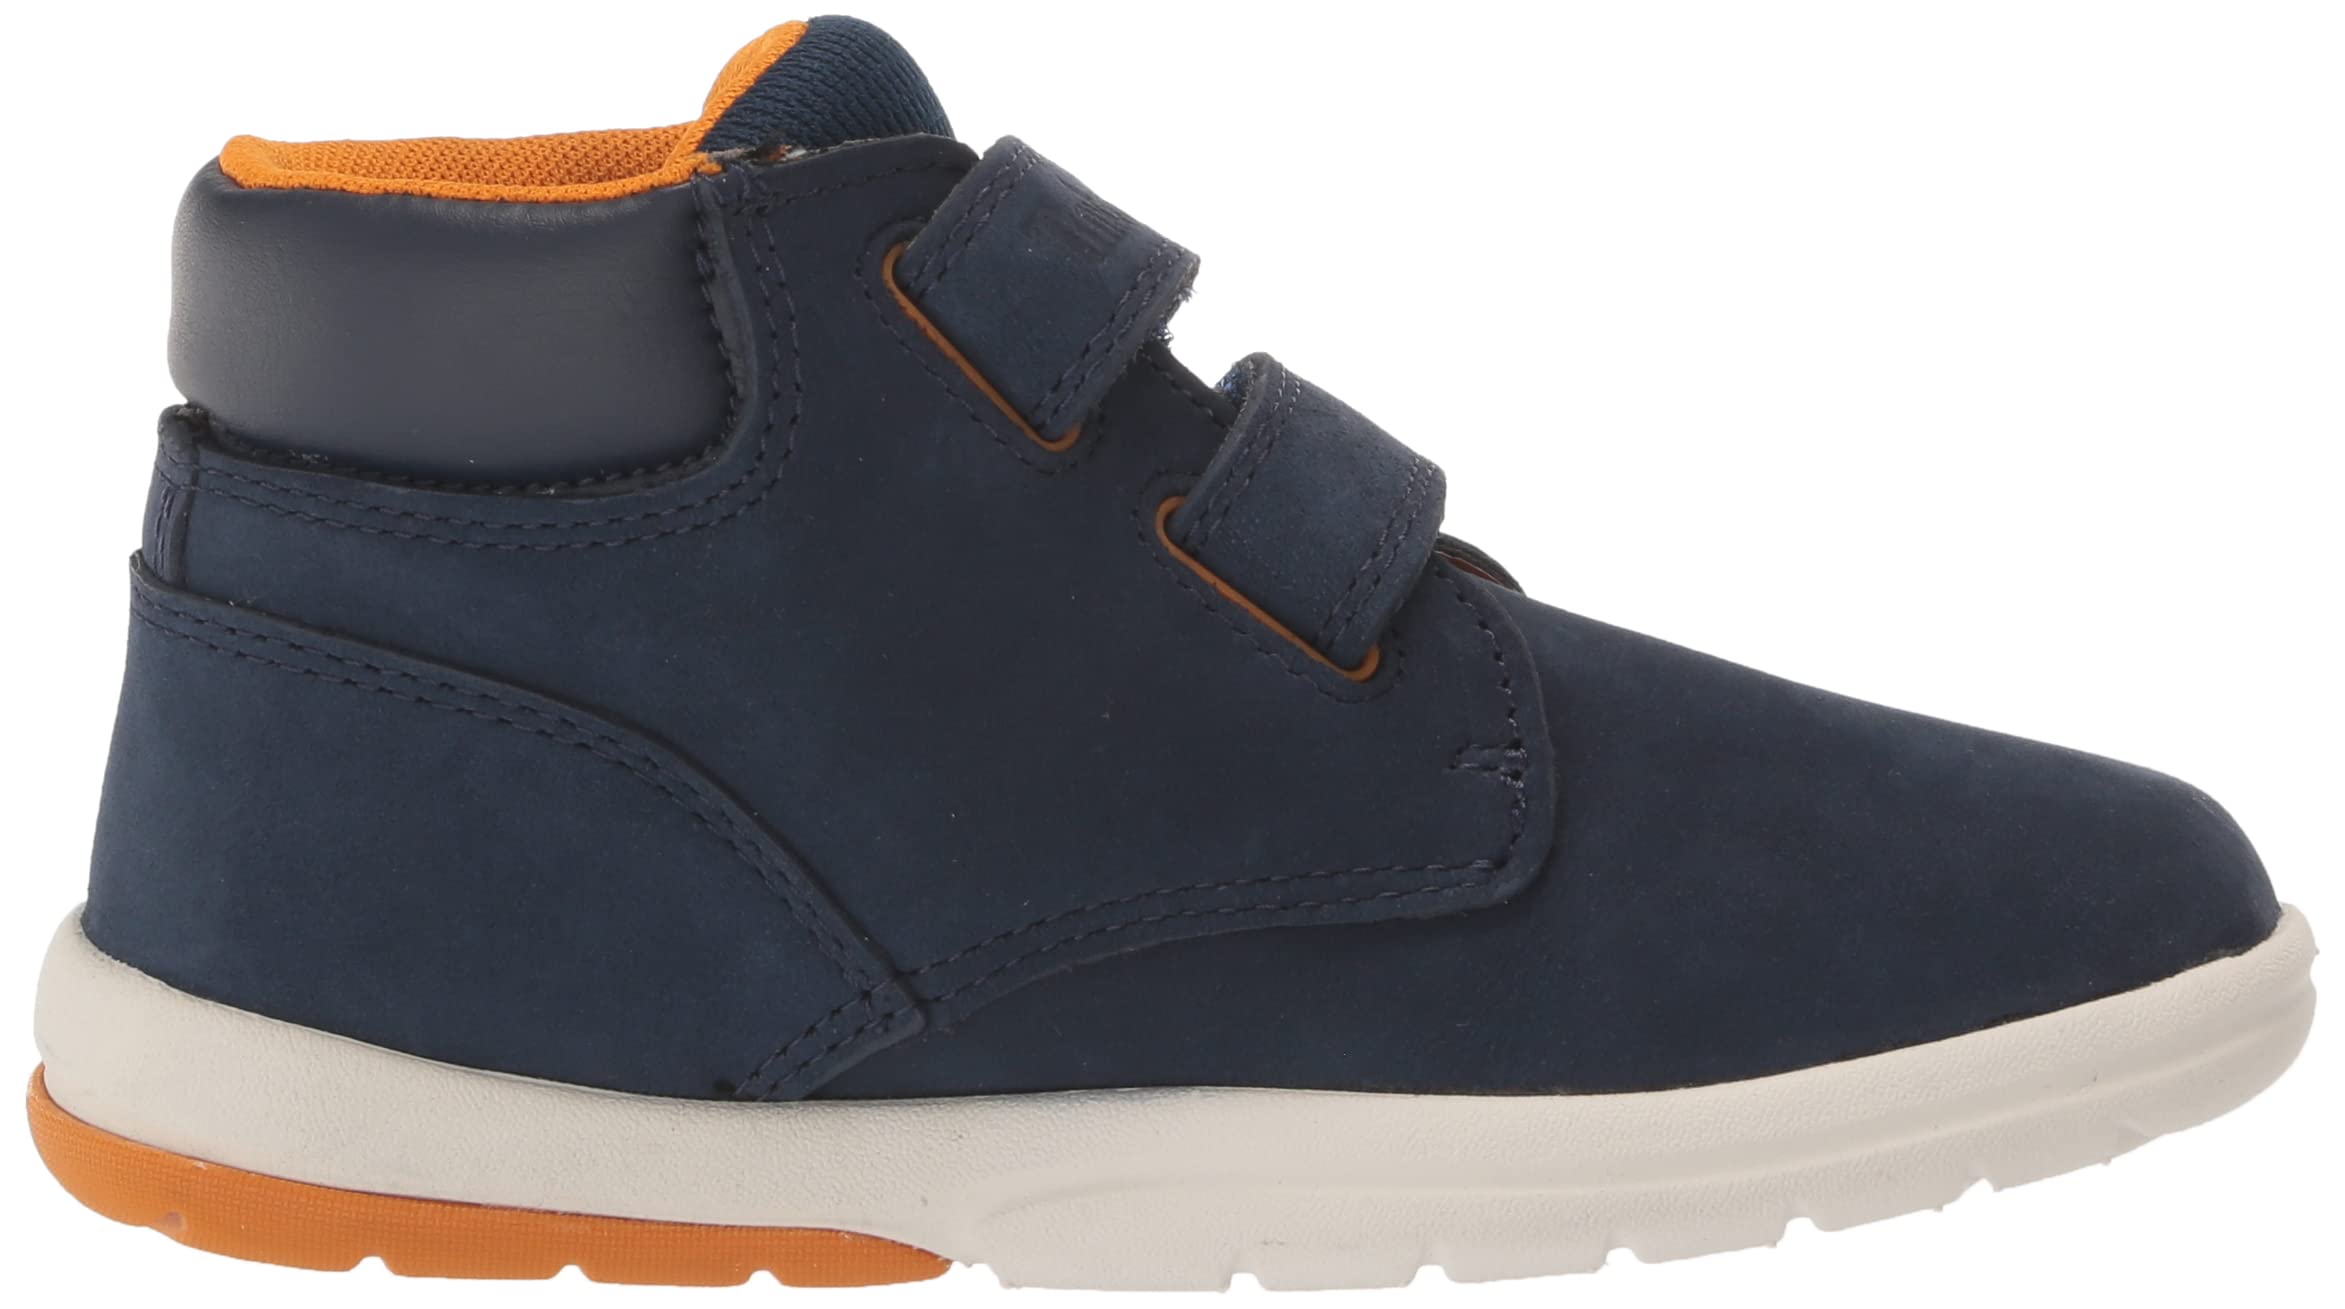 Timberland Unisex-Child Toddle Tracks Hook-and-Loop Bootie